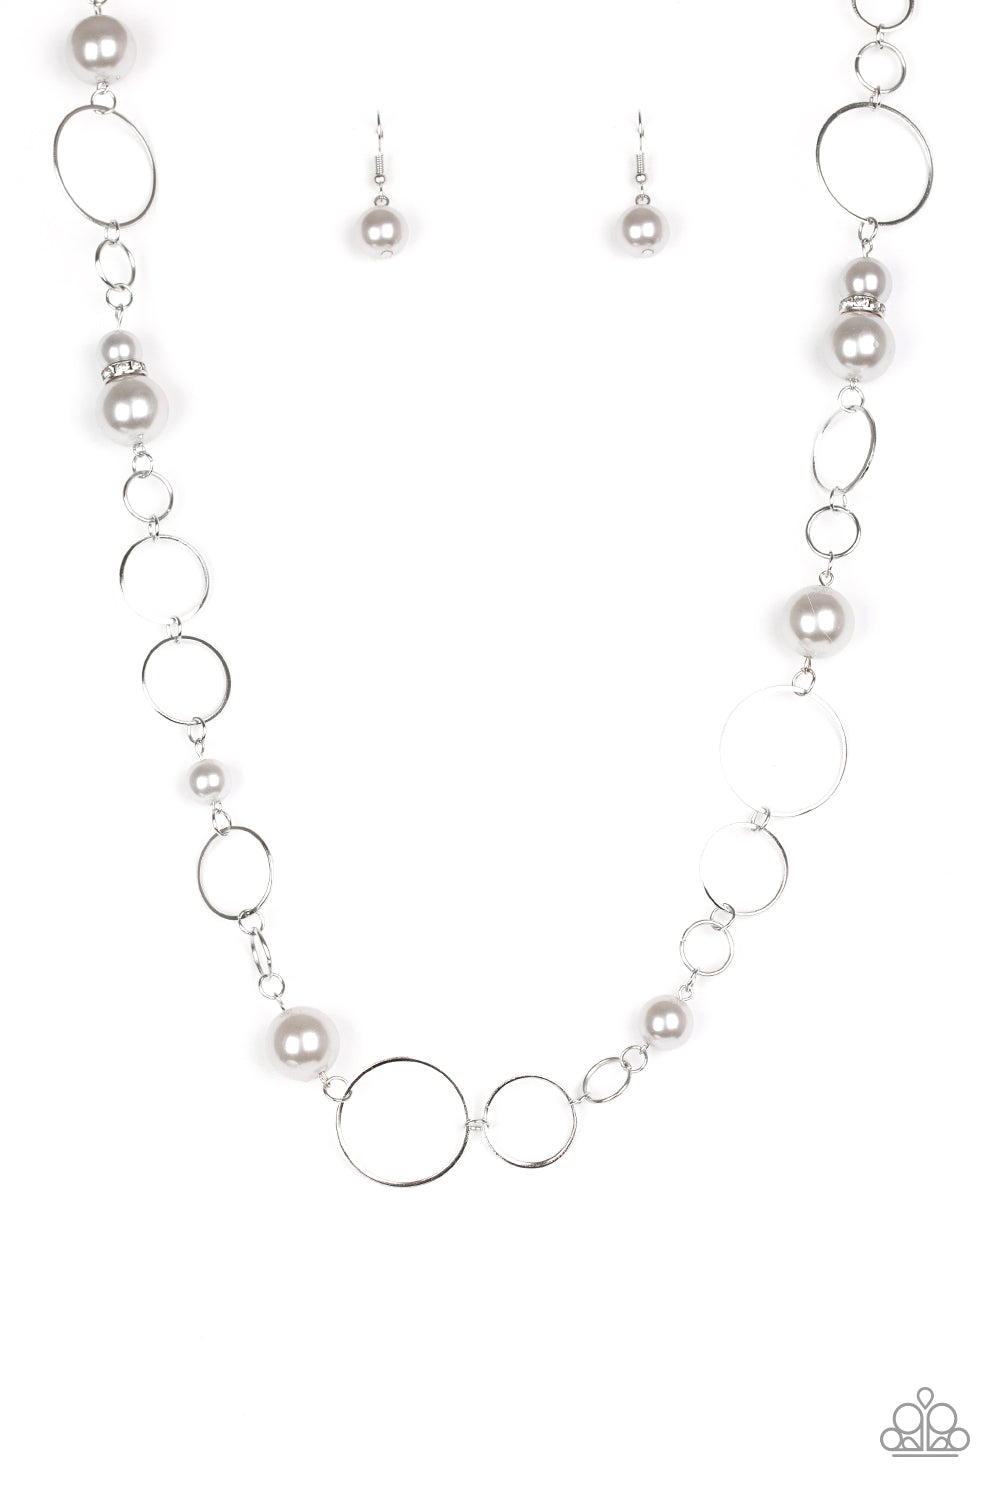 Lovely Lady Luck - silver - Paparazzi necklace